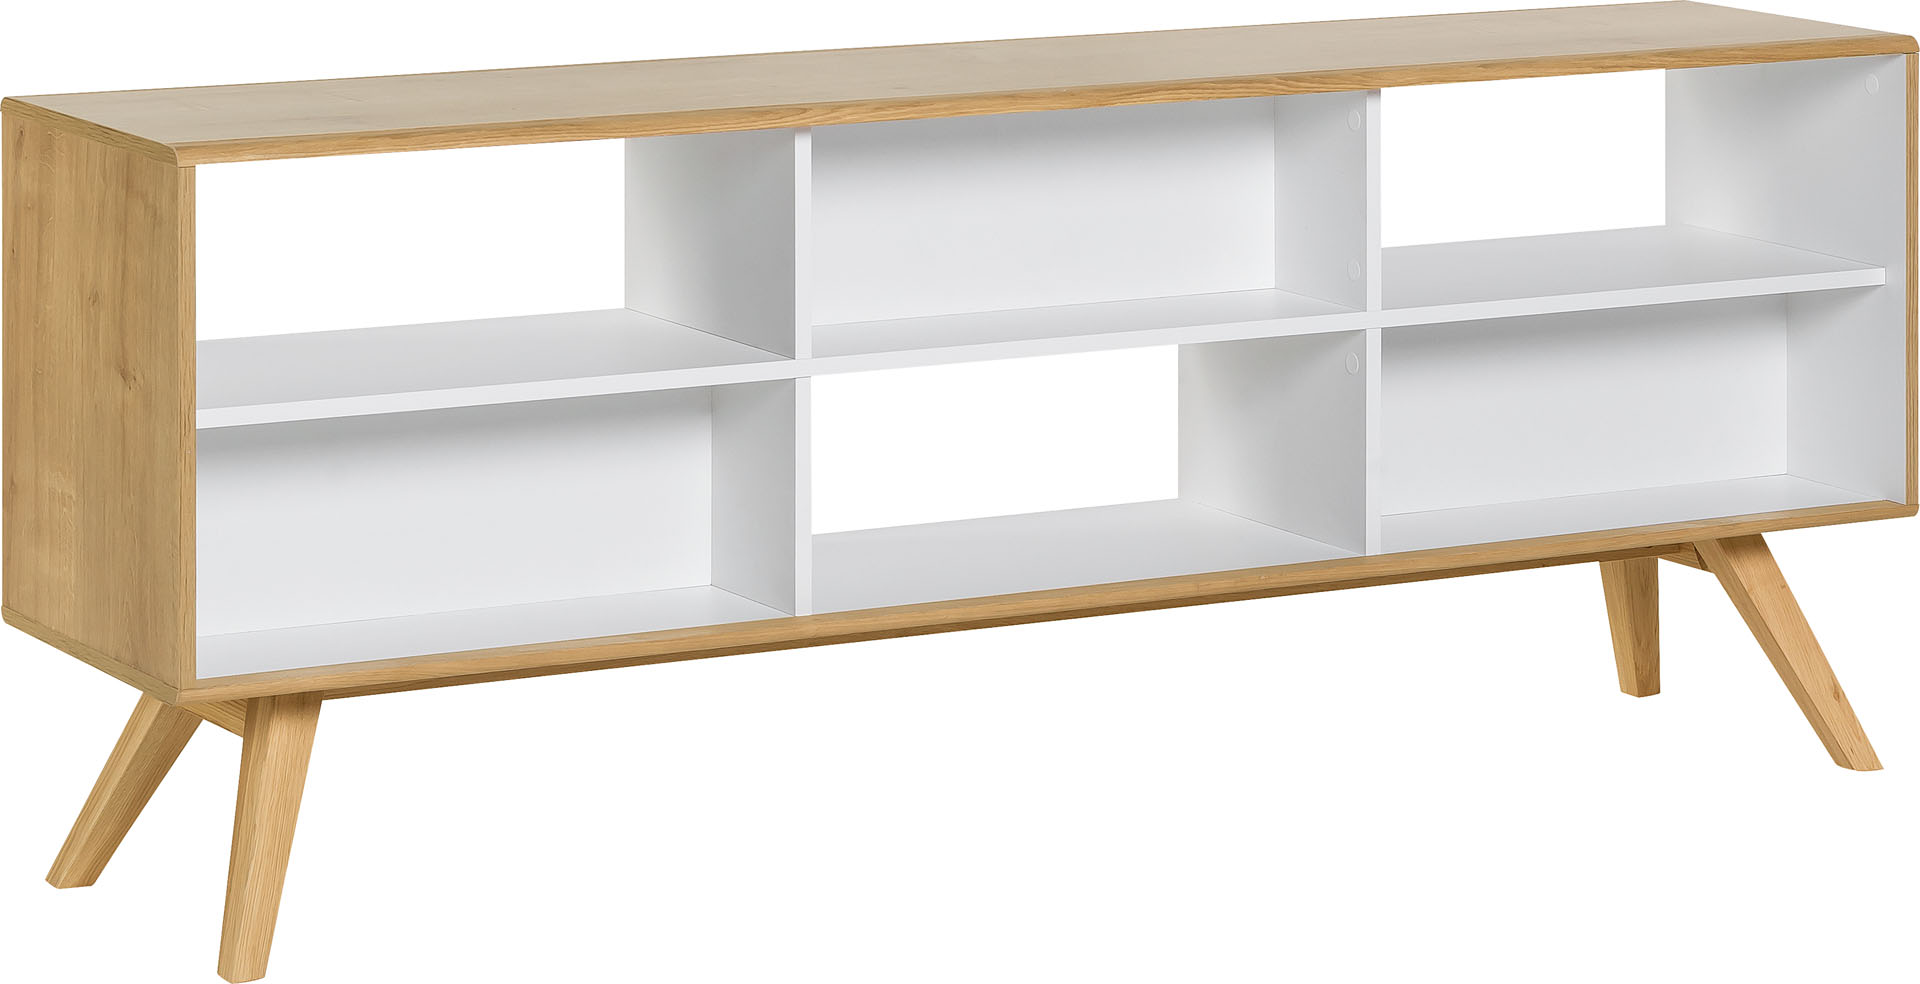 2-sided low bookcase